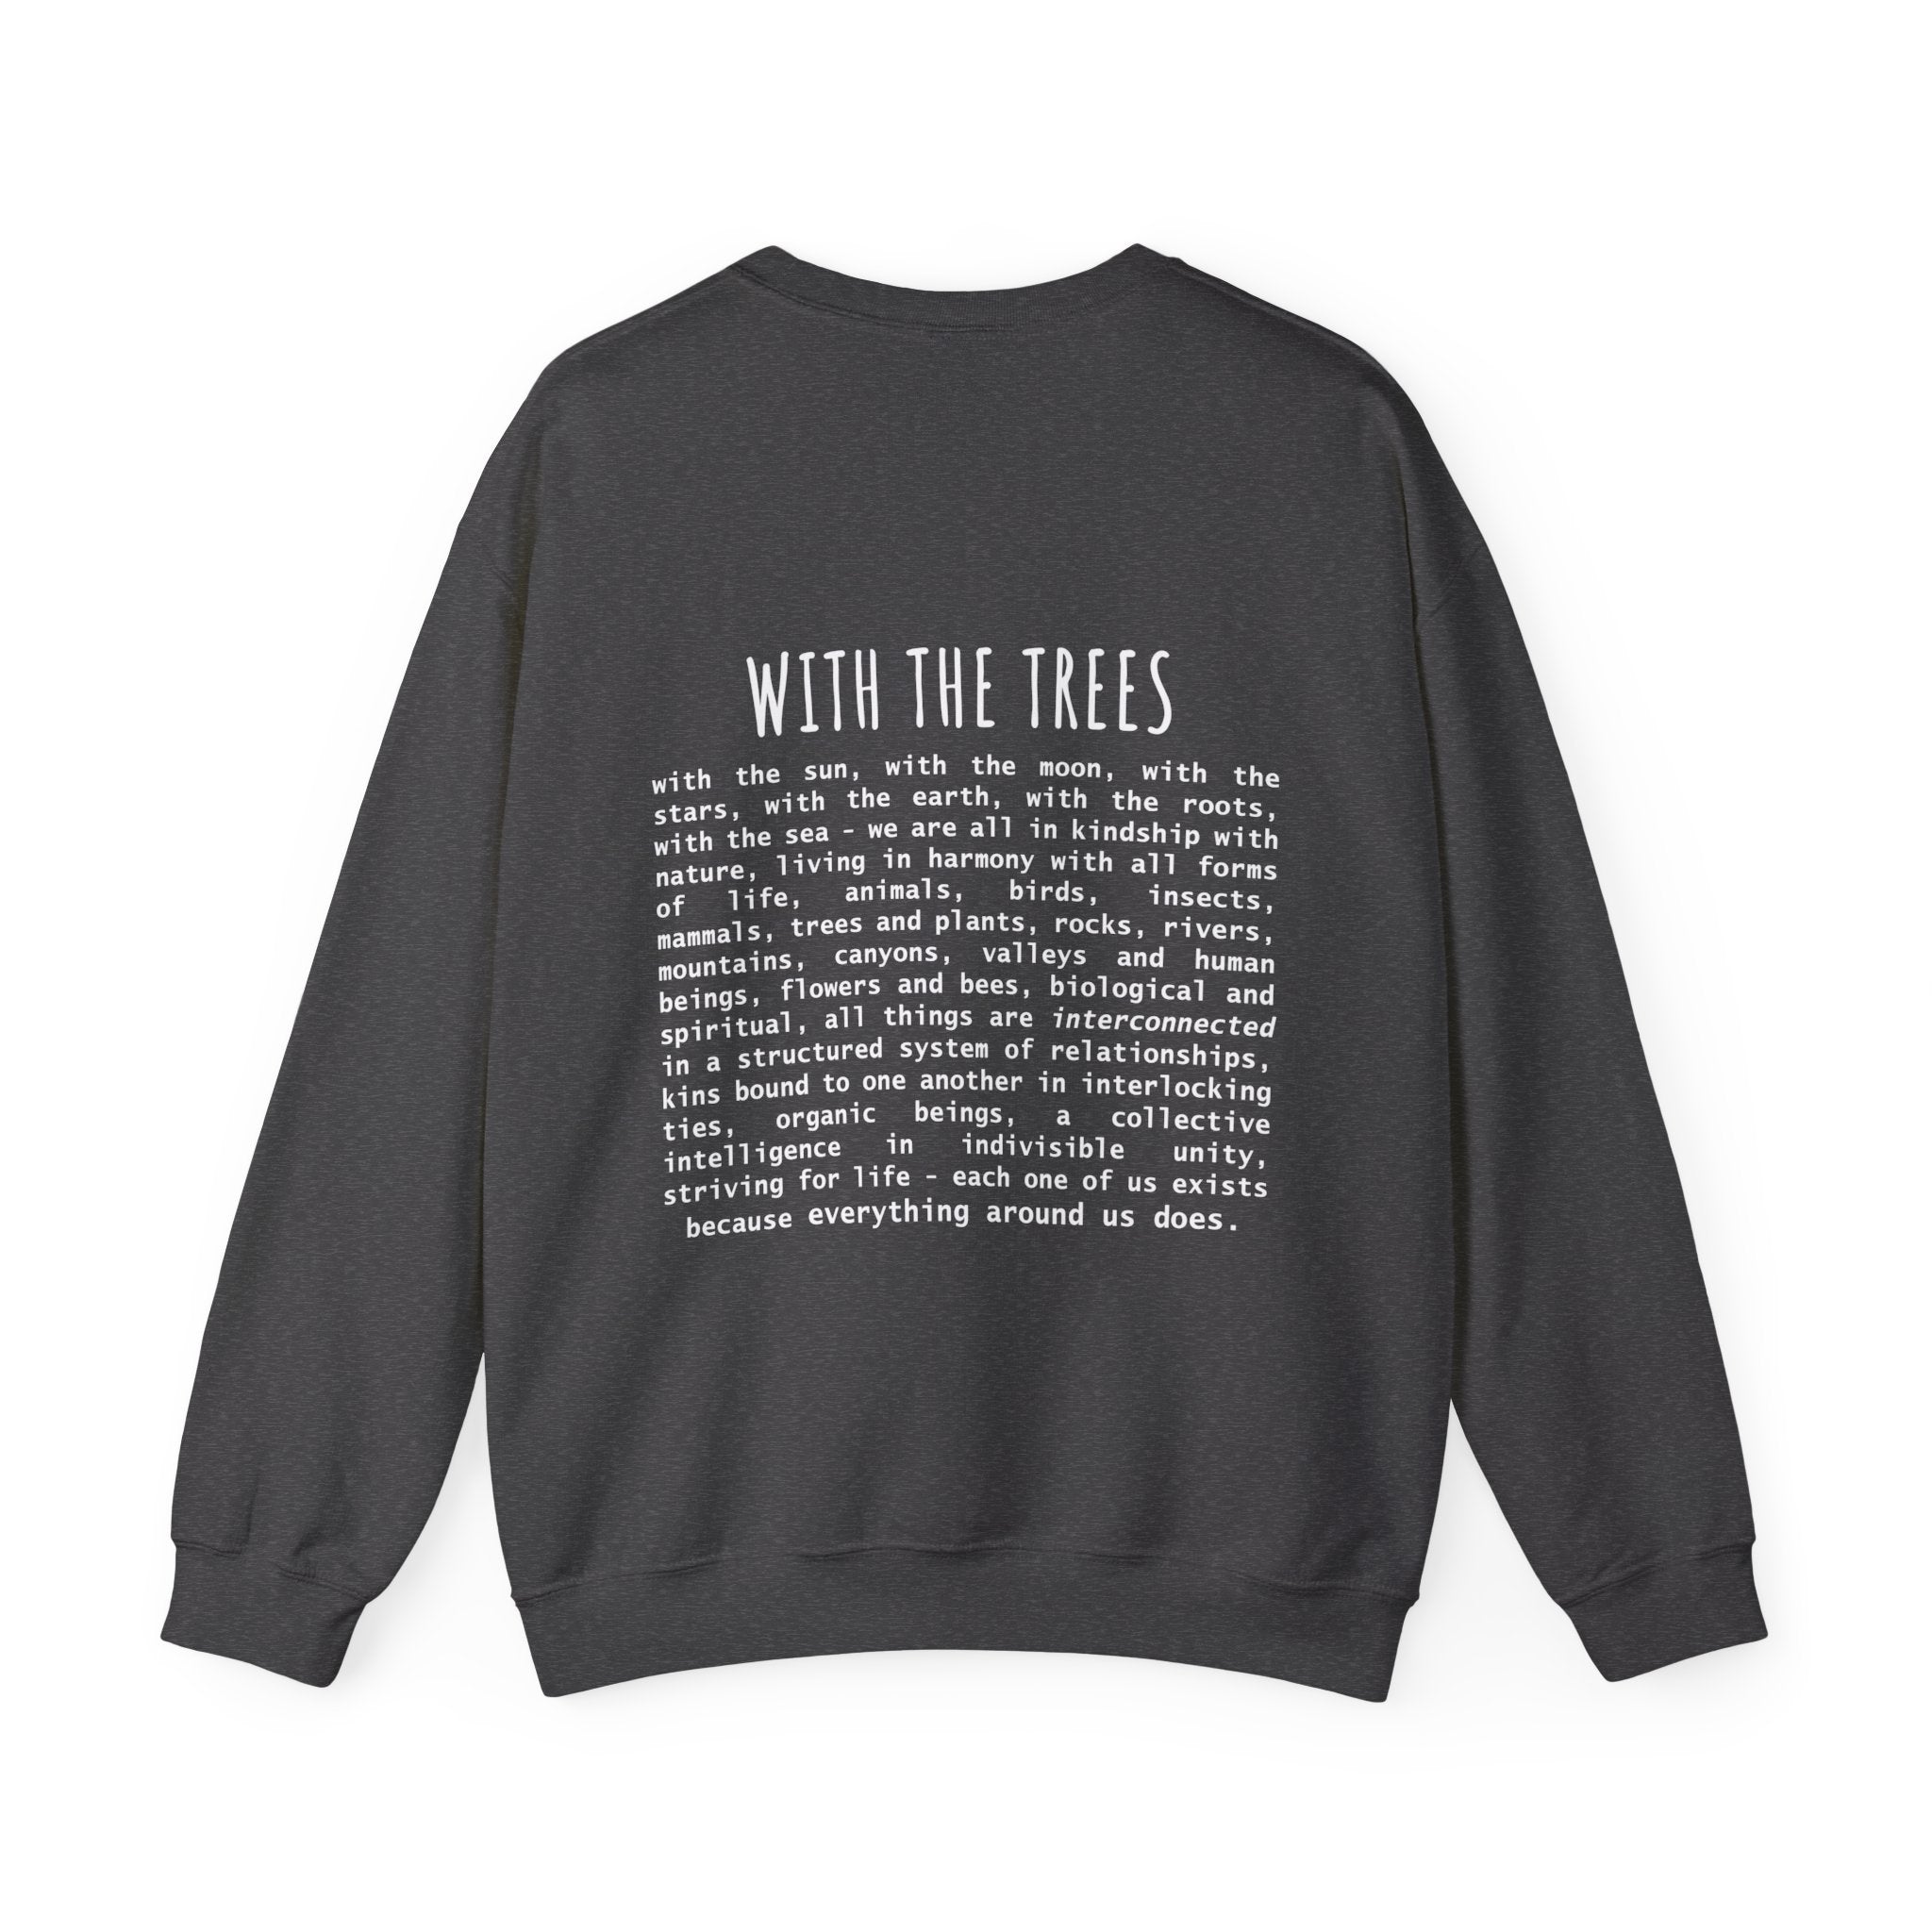 with the trees crewneck sweatshirt - with the trees